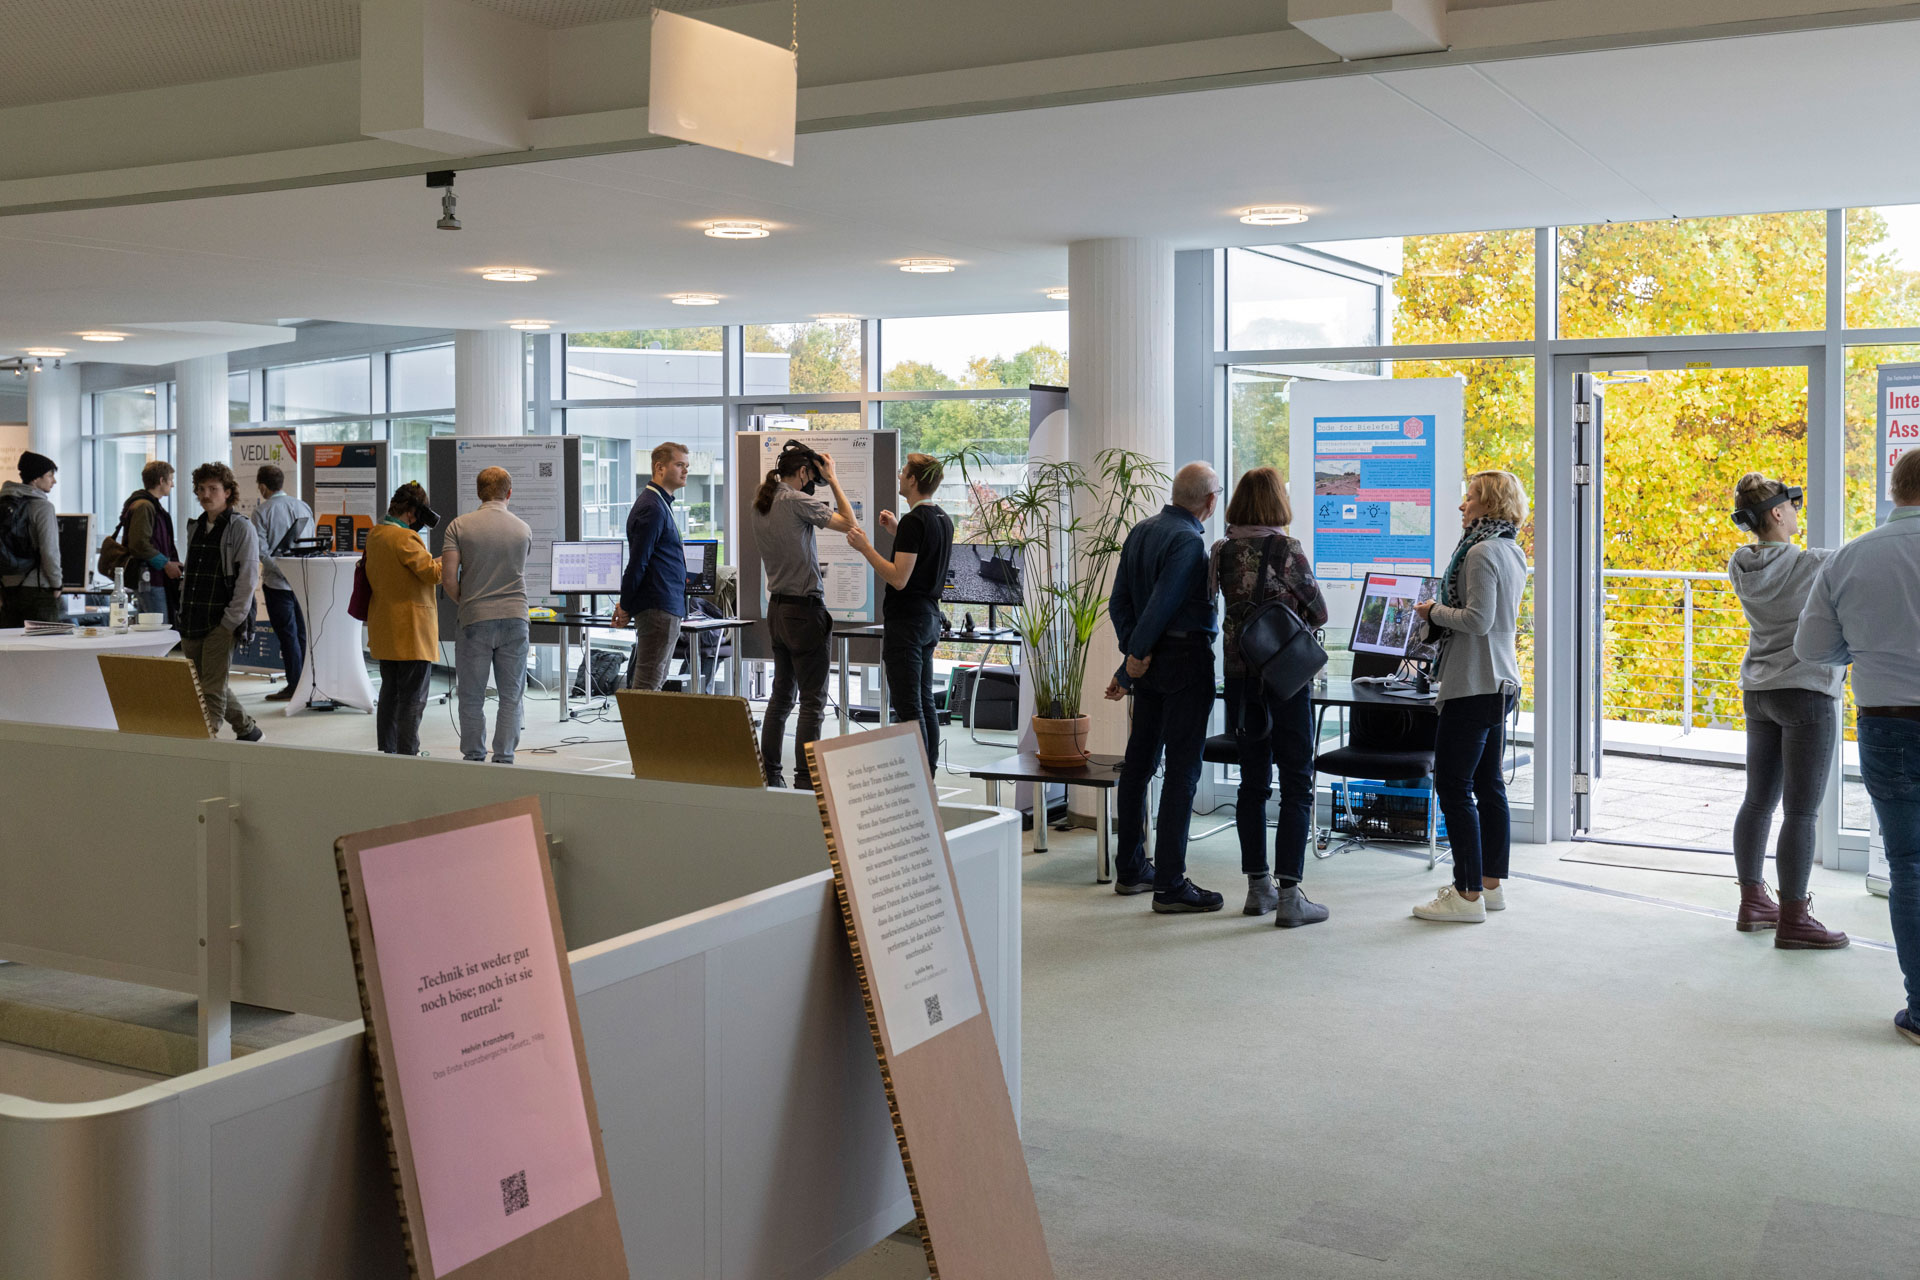 Exhibition in the ZiF foyer